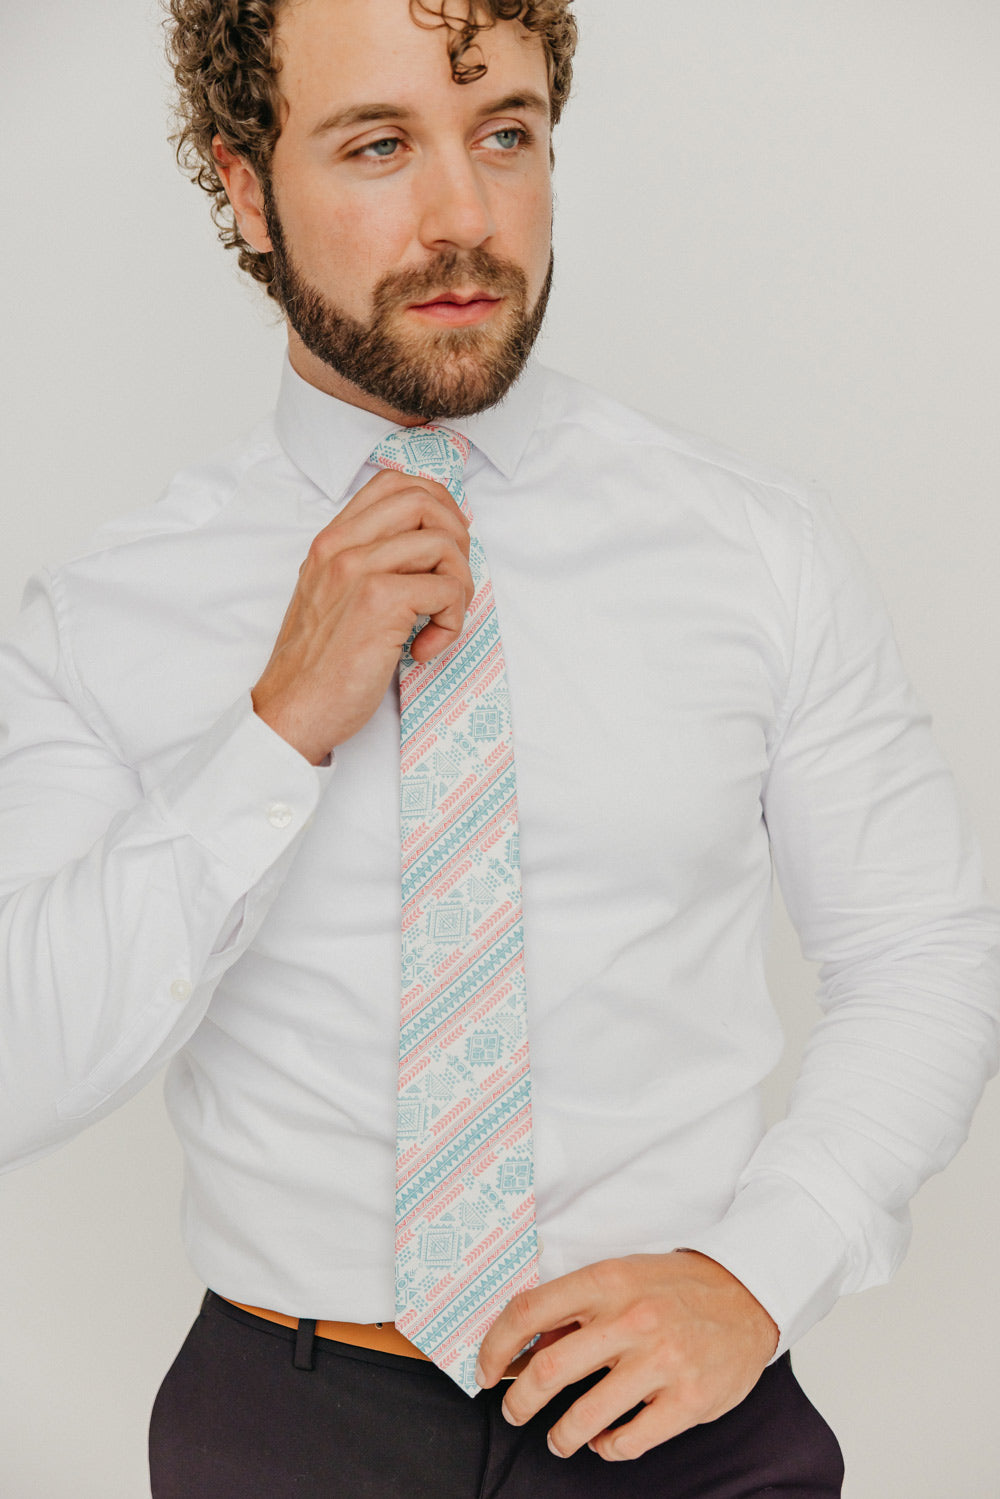 Aztec 3" Wide Standard Tie worn with a white shirt, brown belt and black suit pants.